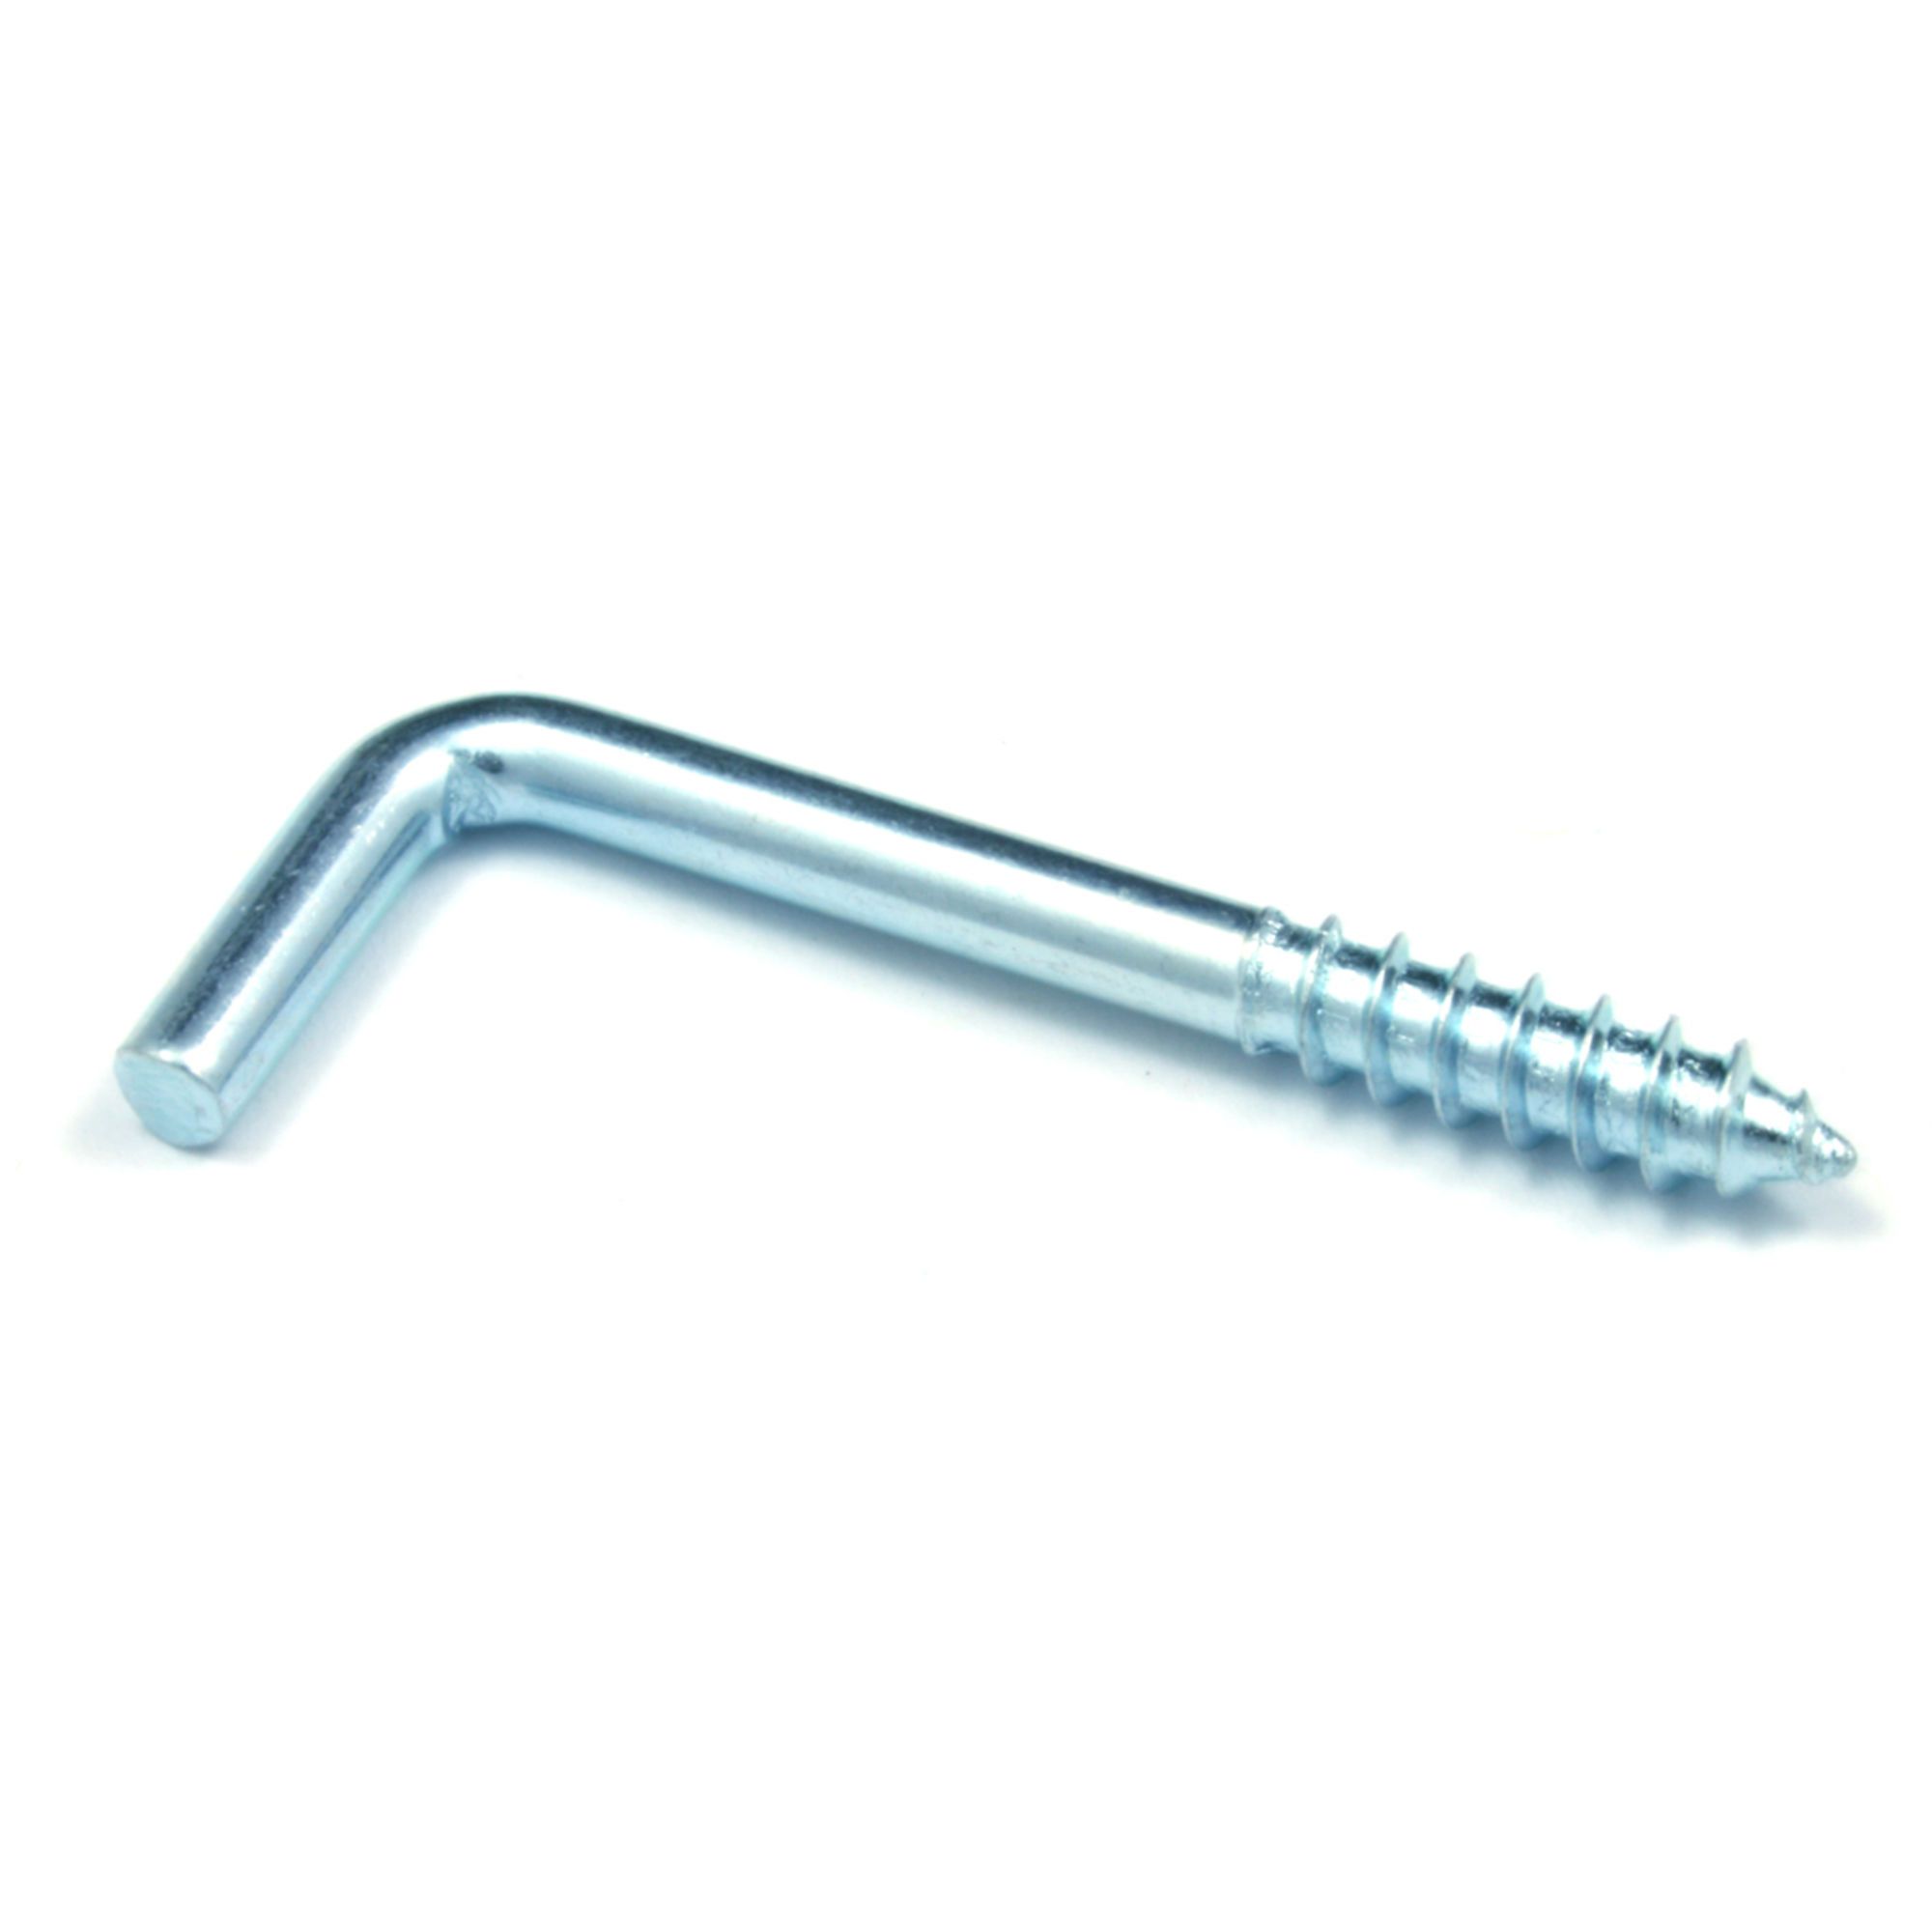 90° Screw hook - 1/8 x 1 1/2 from RELIABLE FASTENERS